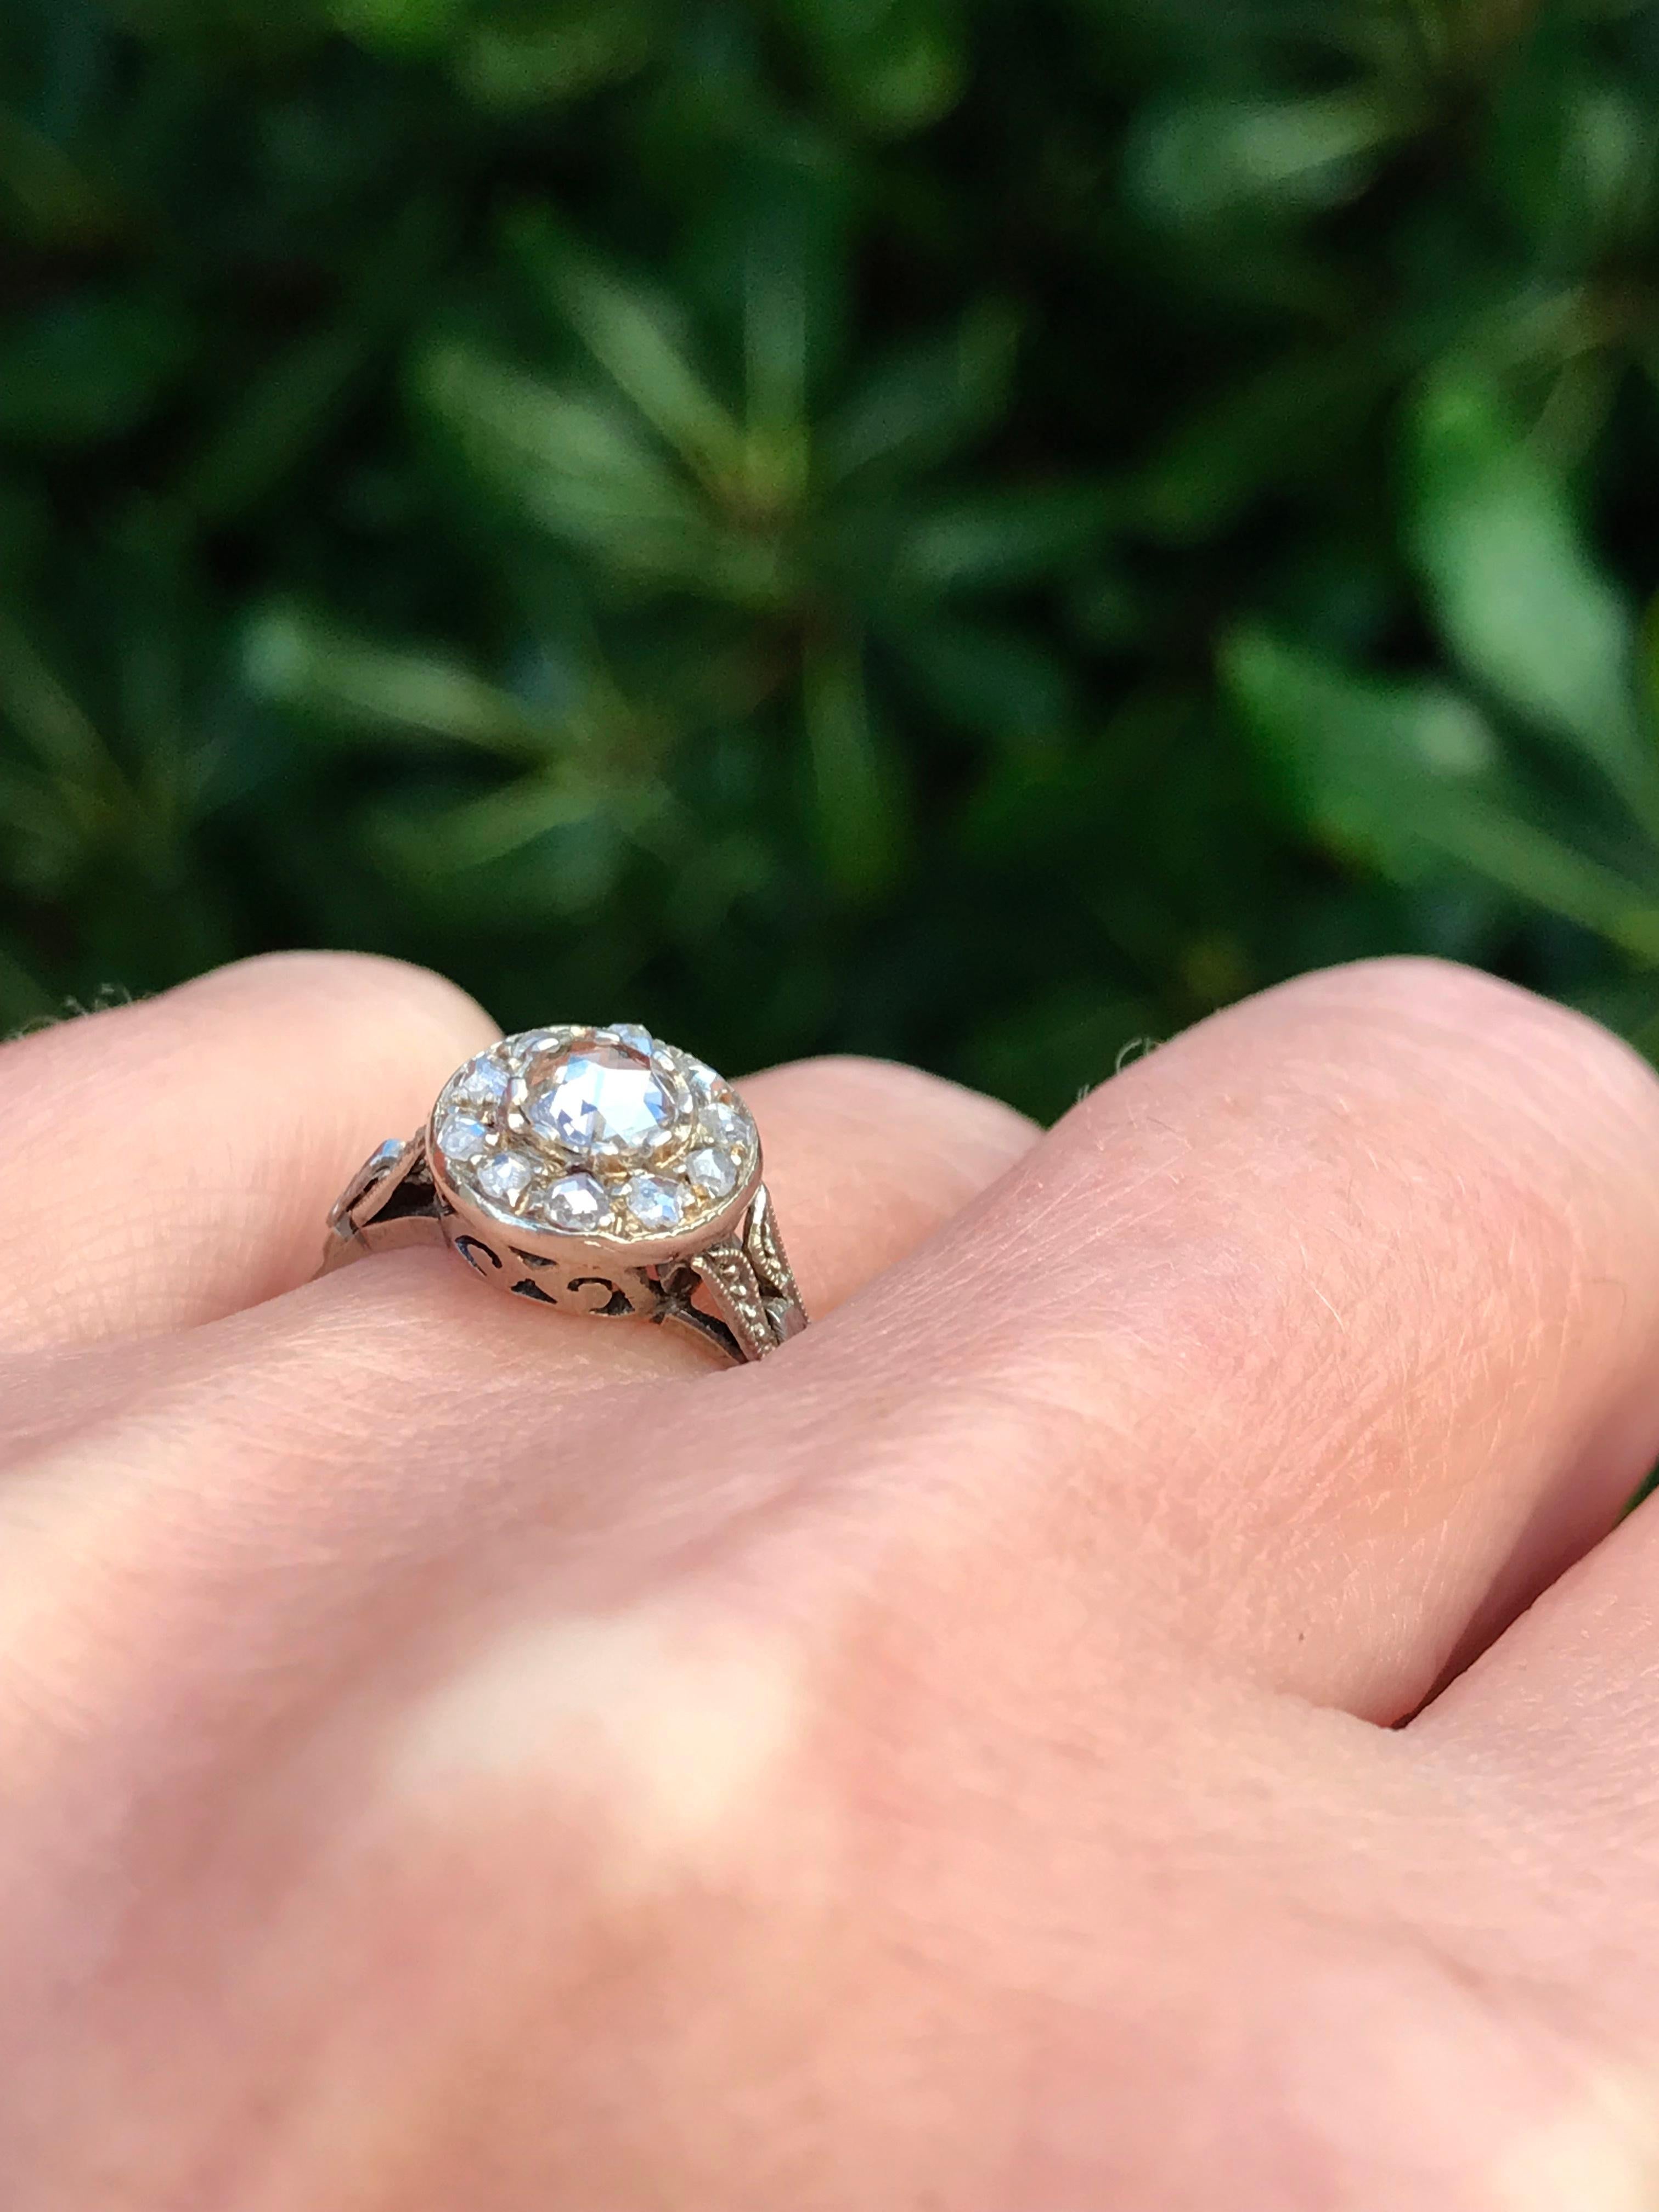 Vintage white gold ring with a light brown 0,25 carat rose cut diamond and 10 white rose cut diamond total weight around  0,20 ct.
handcrafted lovely ring from early twentieth century  Circa 1920.
Ring size 5 3/4 USA , 51 UE resizable